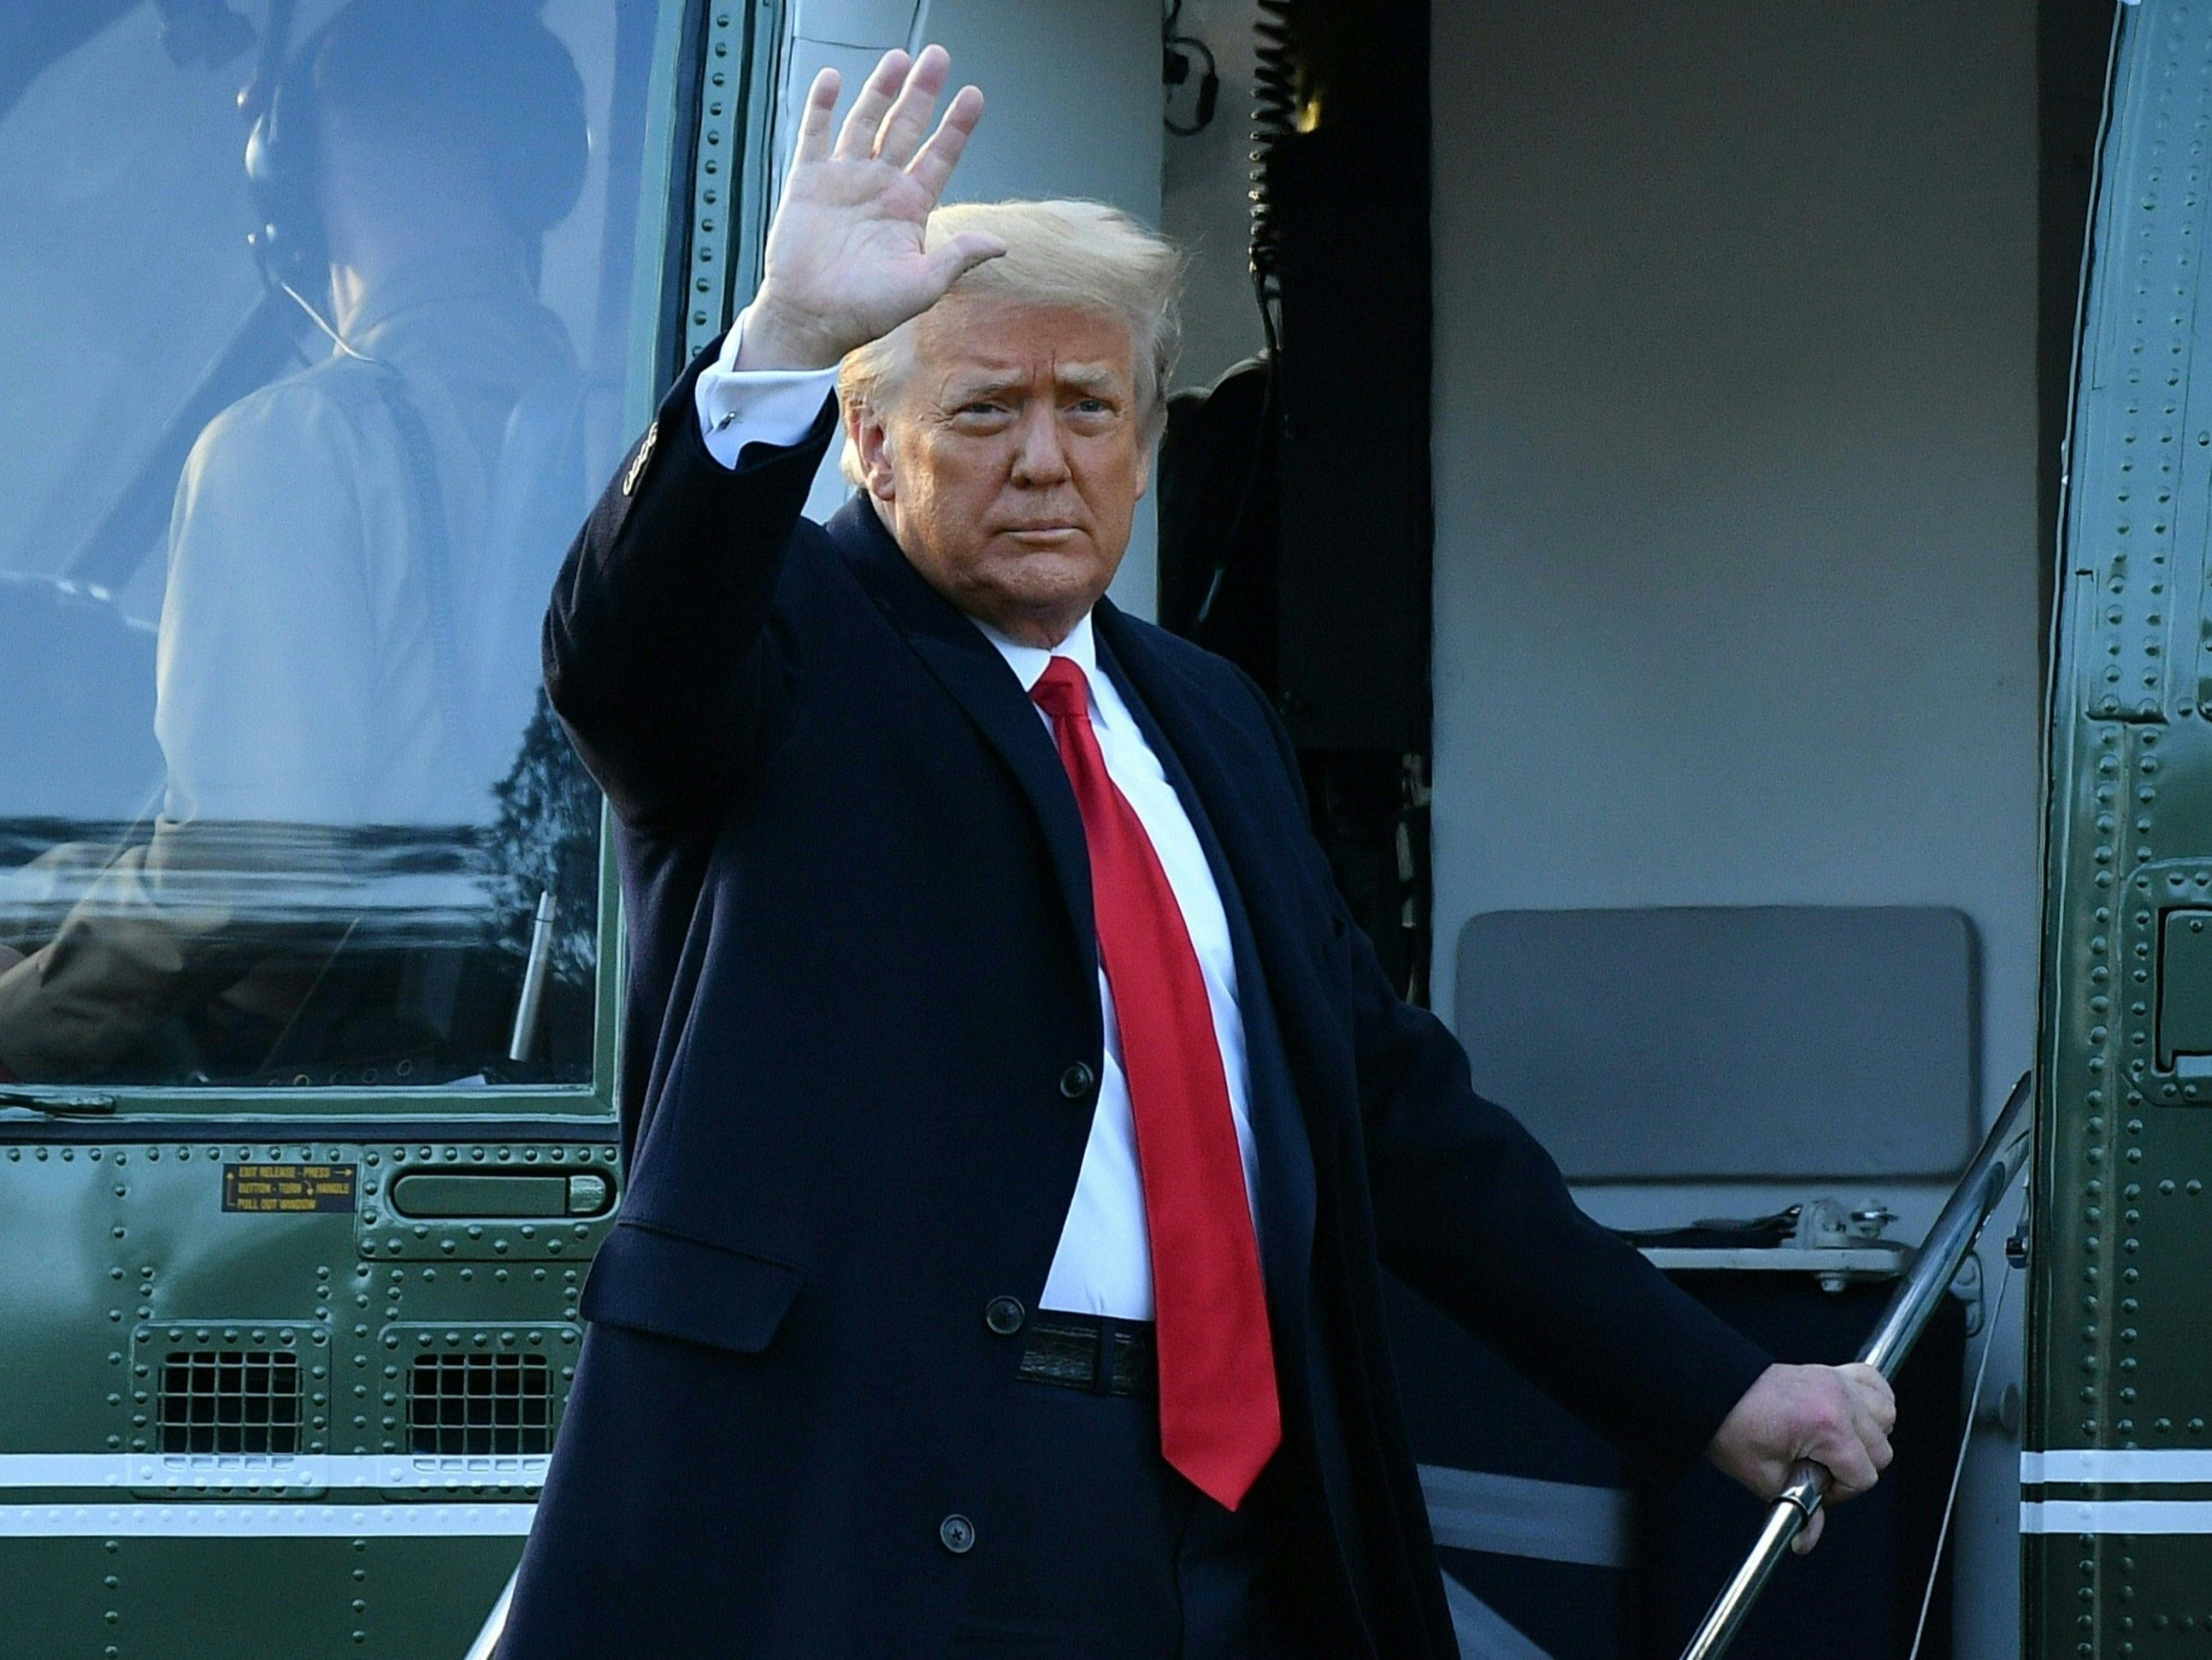 Trump waves as he boards Marine One at the White House for the last time - but will he still be a major influence on US politics?